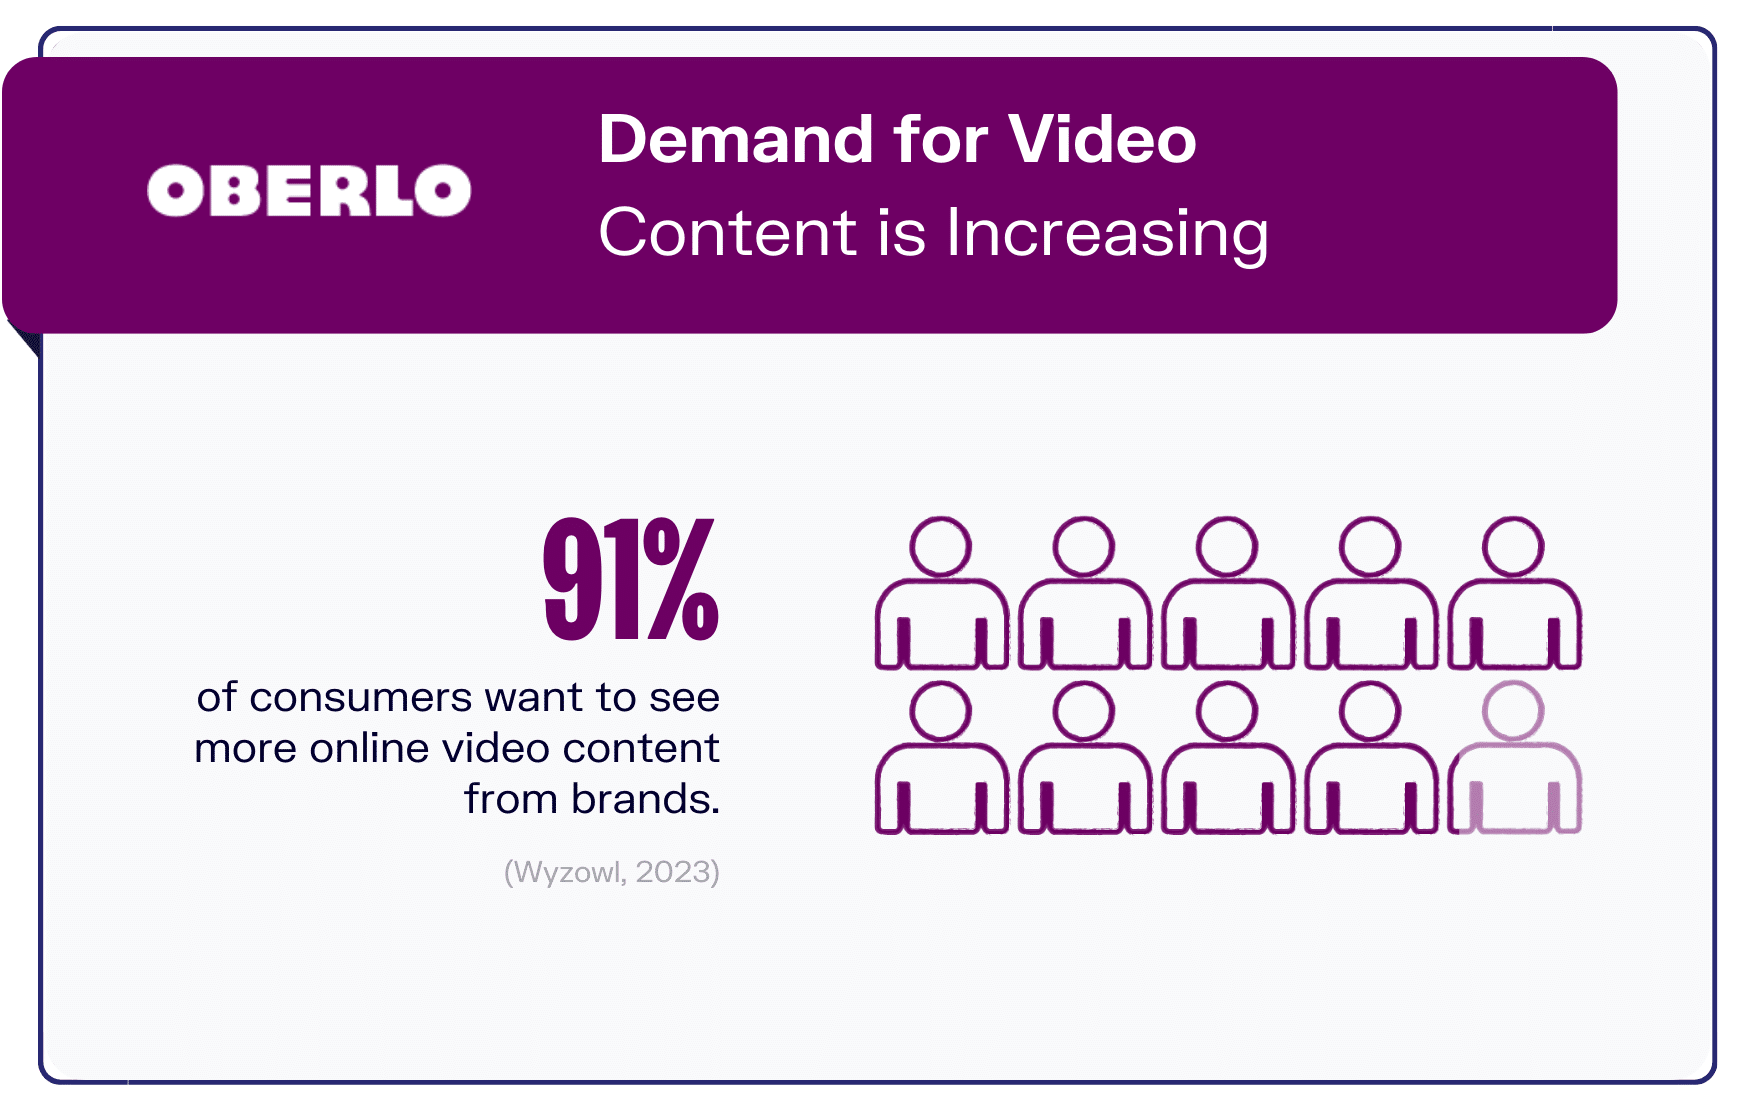 graphic shows that 91% of consumers want to see more video content from brands